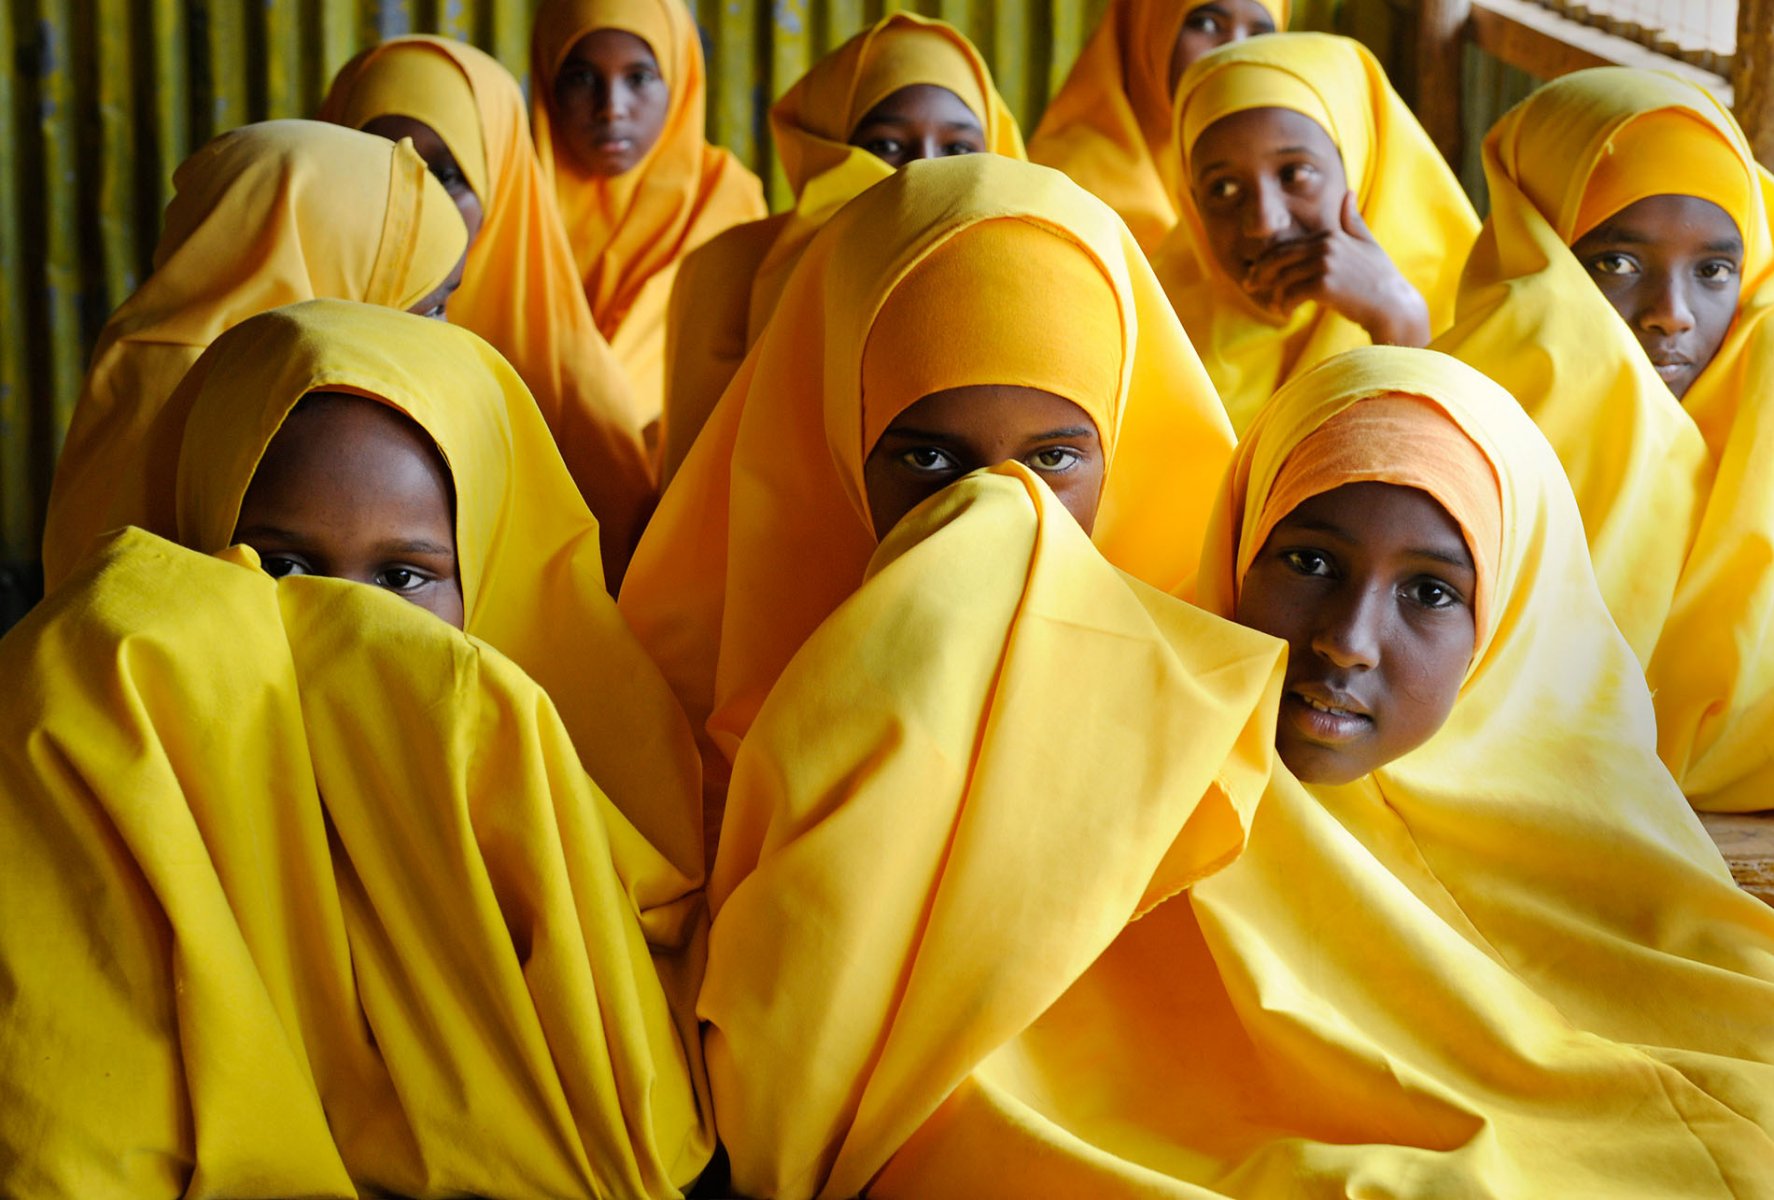 Girls hiding their faces from the photographer at a school inside a refugee camp in Dadaab, northeastern Kenya on friday, August 5, 2011. Within the camps infrastructure, the schools are a major importance. Somalia and parts of Kenya have been struck by one of the worst droughts and famines in six decades, more than 350.000 refugees have found shelter in the worlds biggest refugee camp. Foto: Boris Roessler dpa